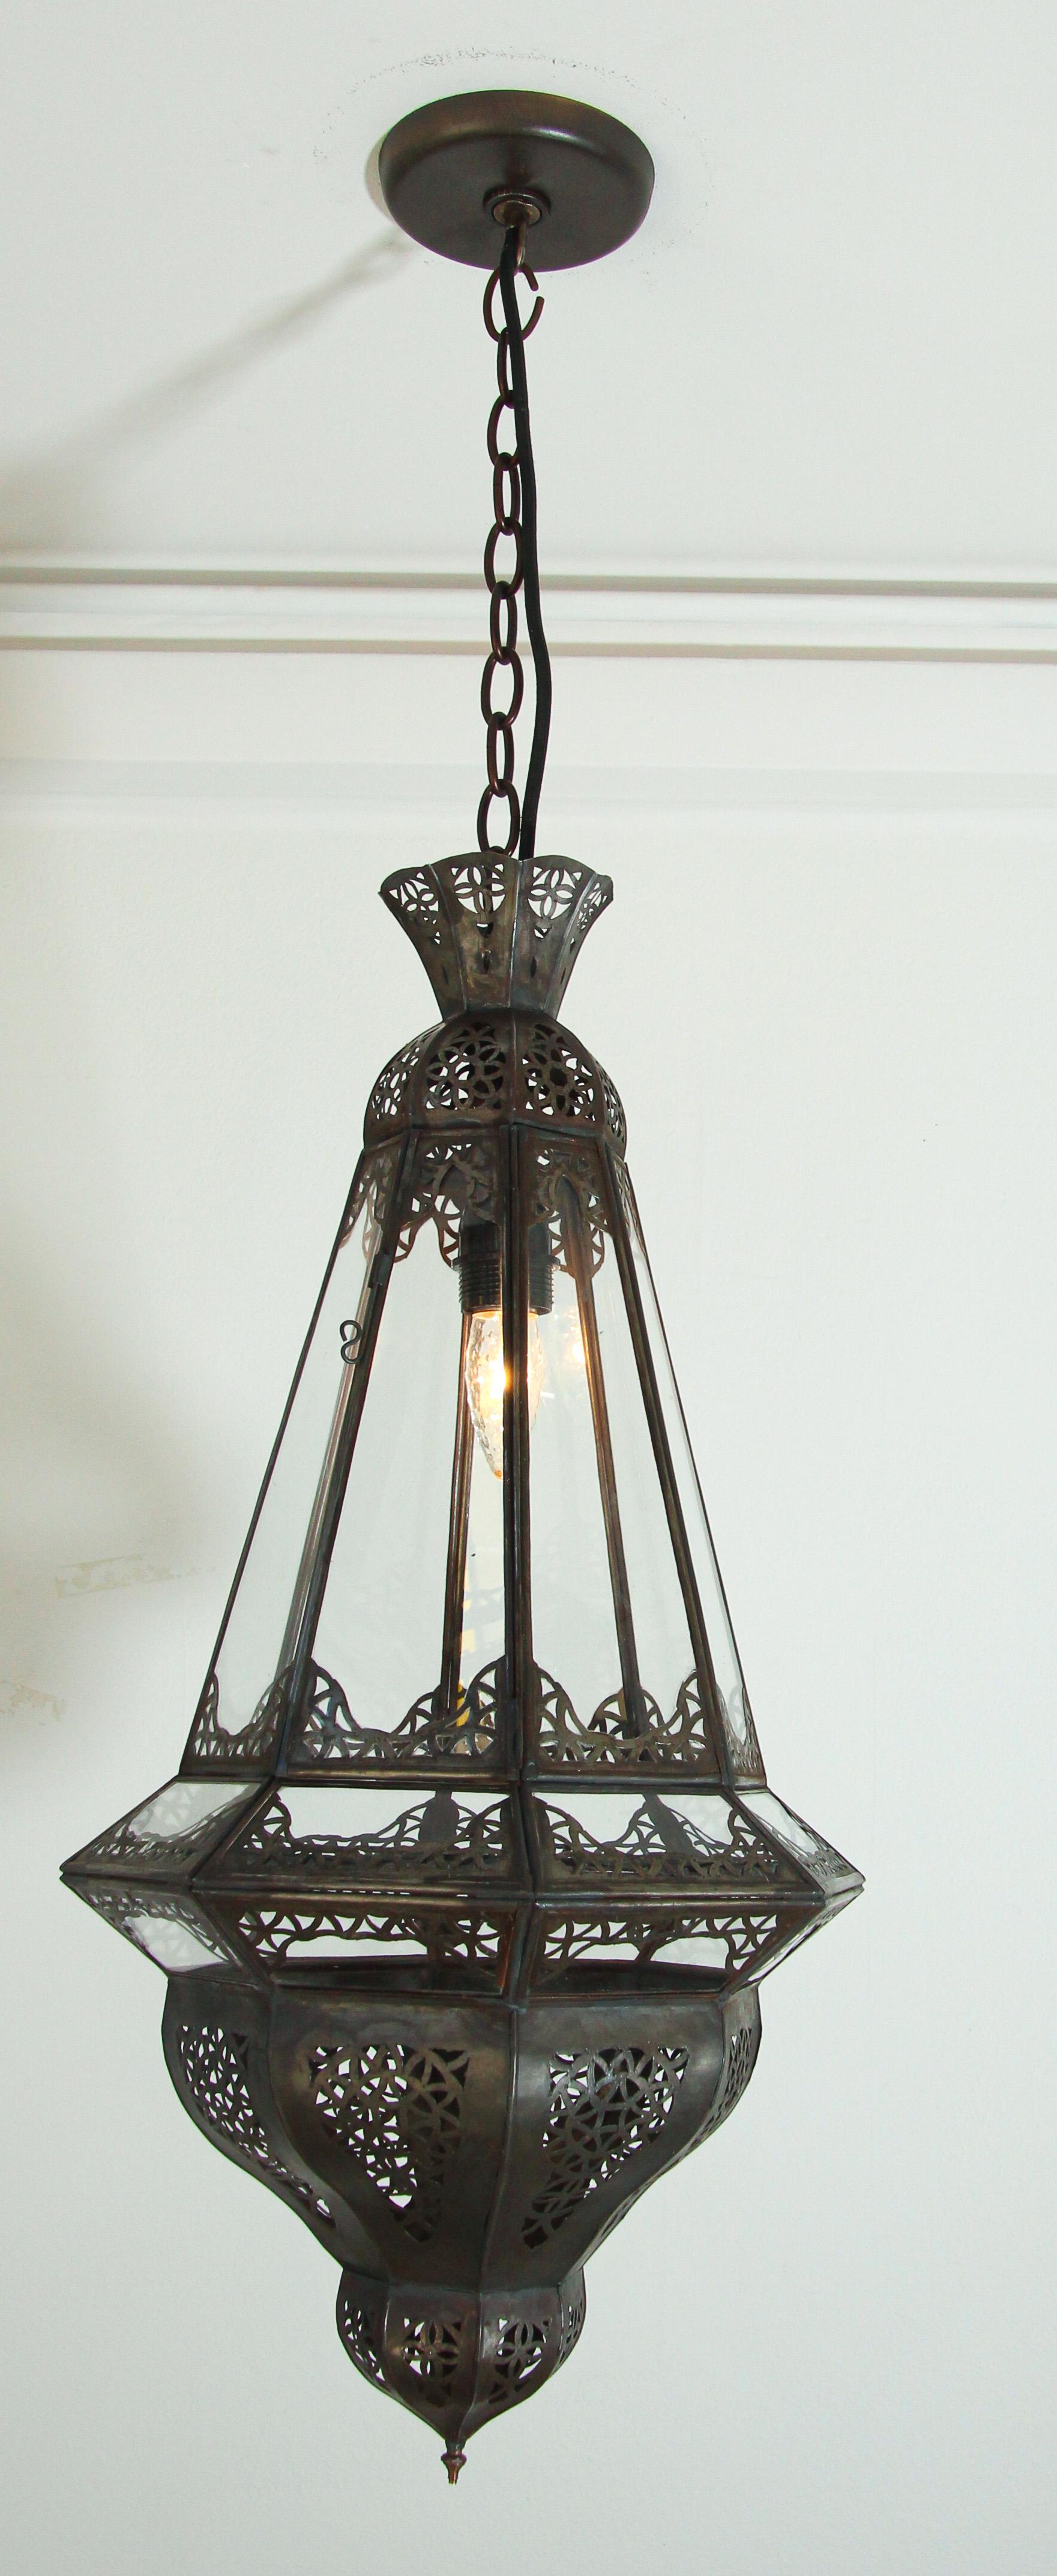 Moroccan lantern in diamond shape with clear glass and metal.
This Moorish light fixture is handcrafted by artisans in Morocco
The metal is delicately hand-cut in filigree Moorish designs, brass finial.
The vintage Moroccan Harem lantern is